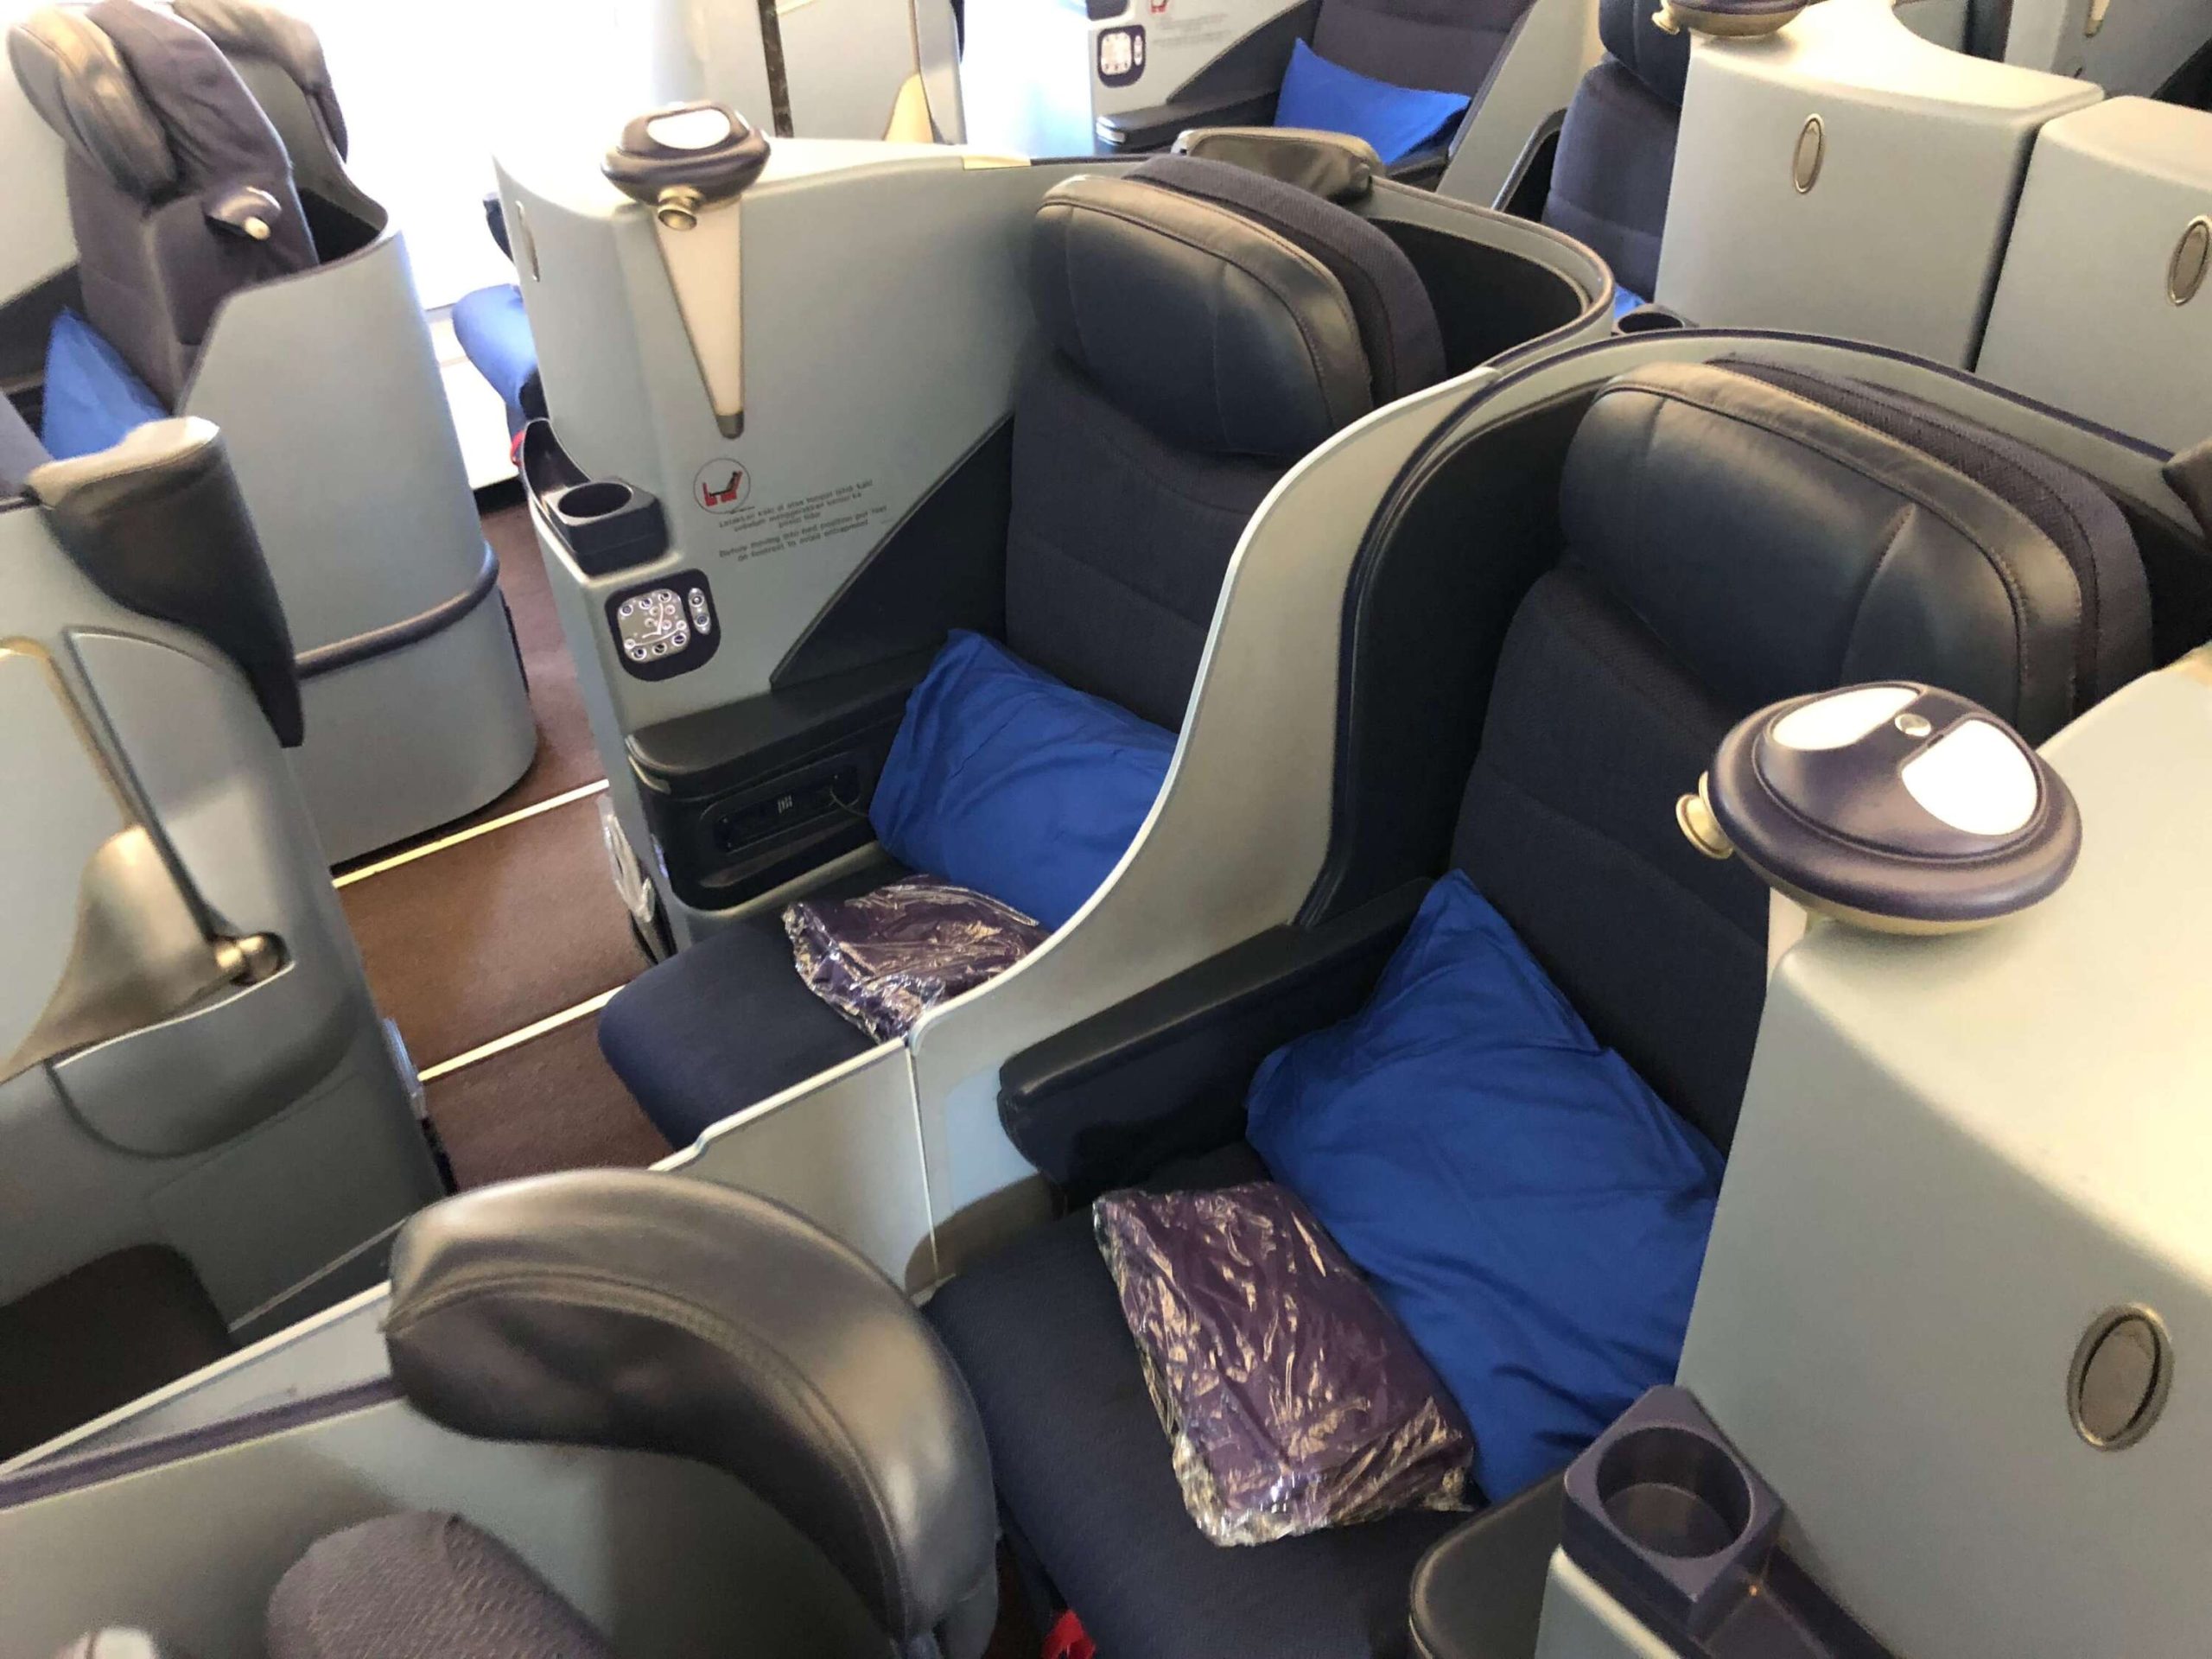 Malaysia Airlines Business Class Seats